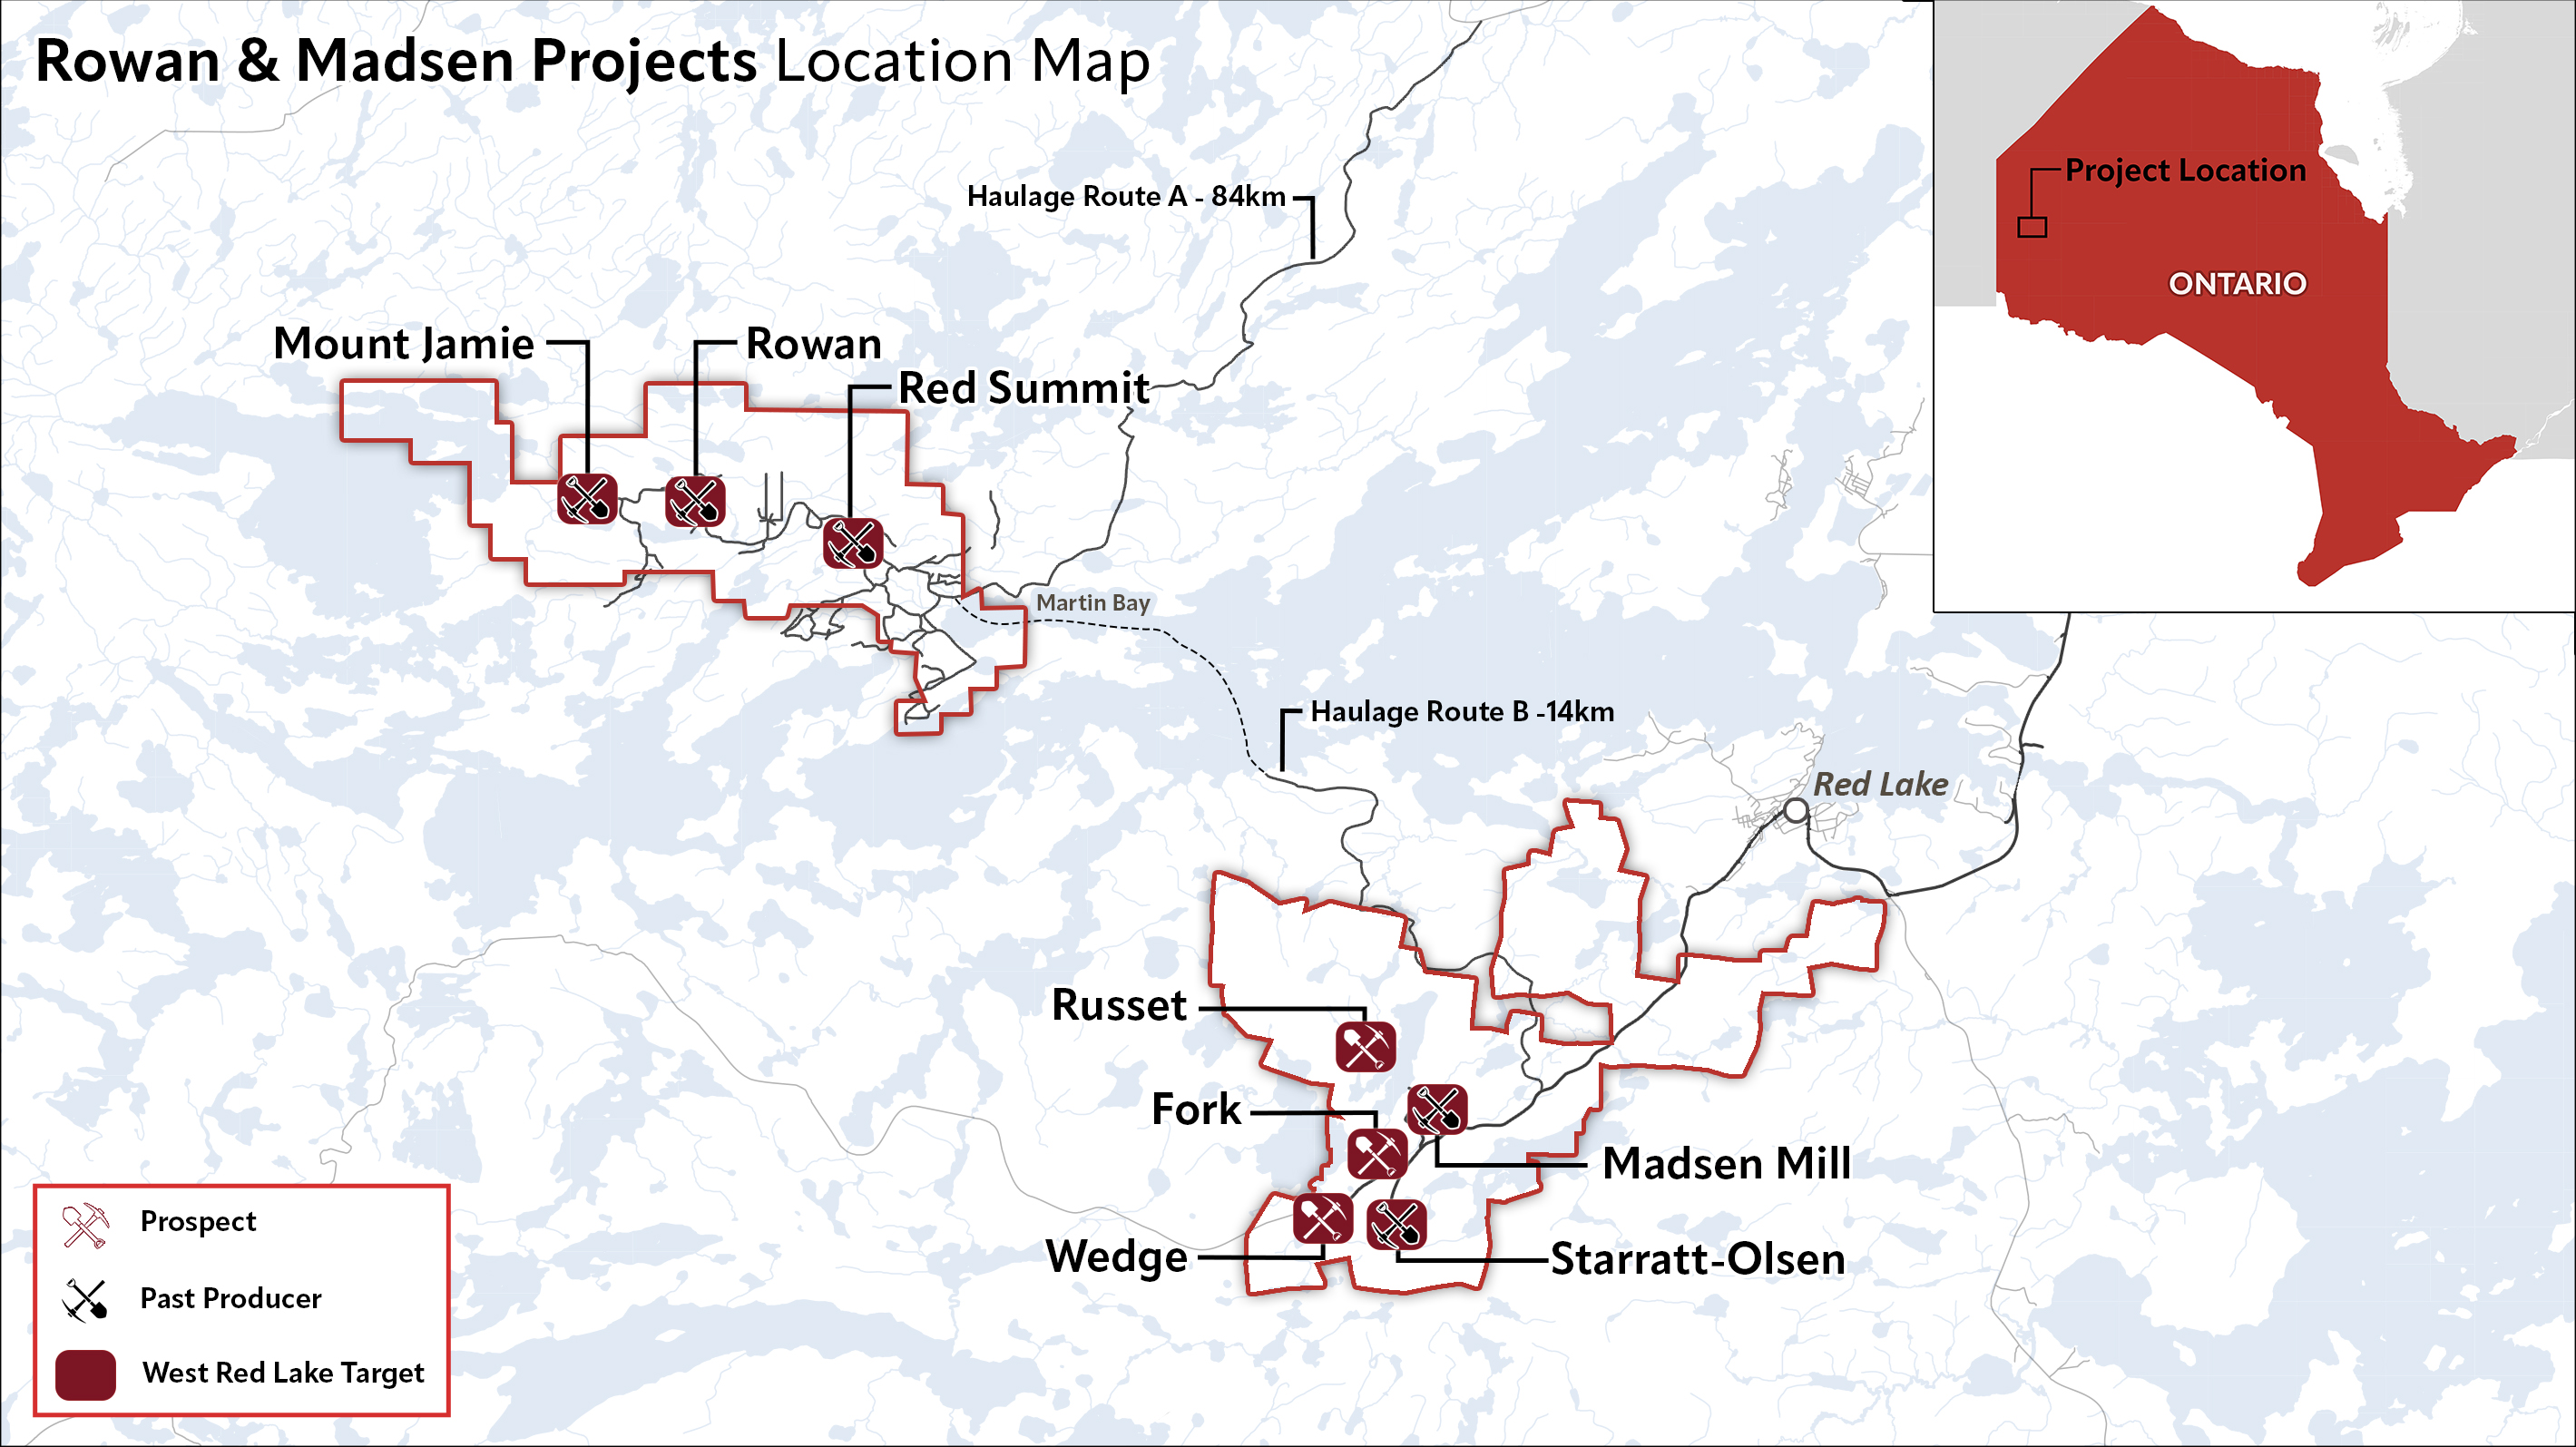 2023-11-15-NR_WRLG_Rowan_and_Madsen_Projects_Location_Map